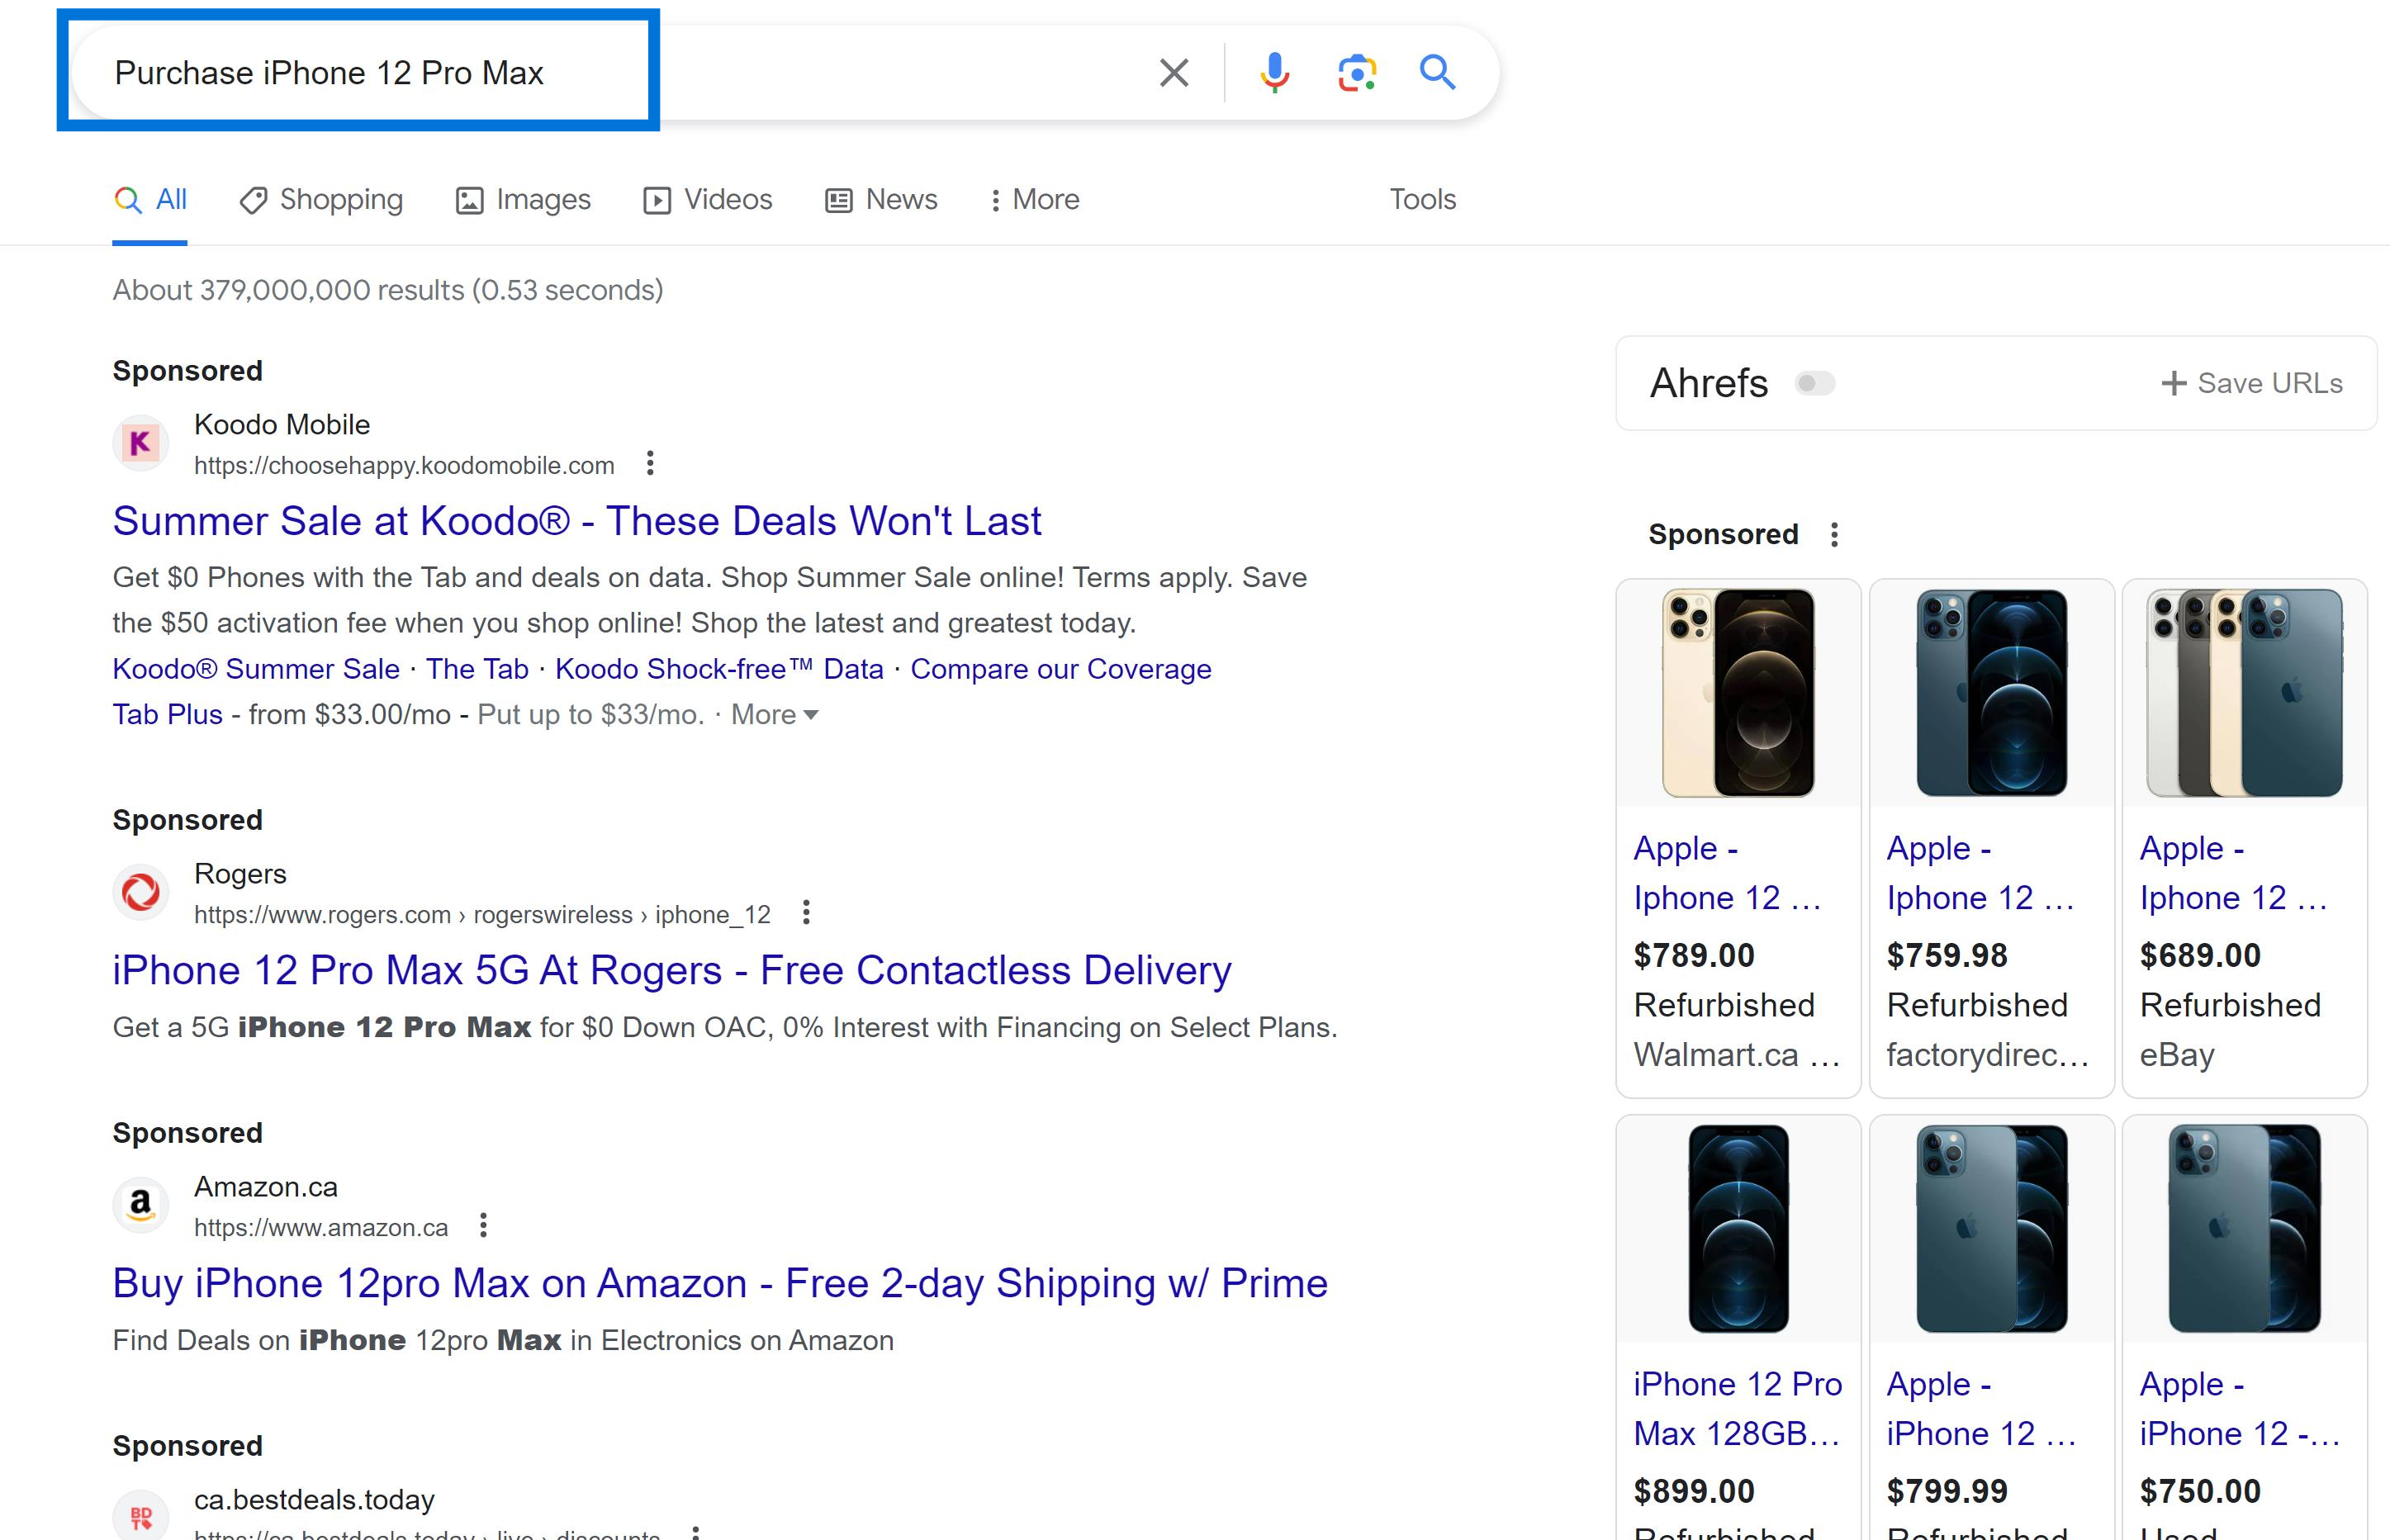 Transactional Search Intent Example "purchase iphone 12 pro max"